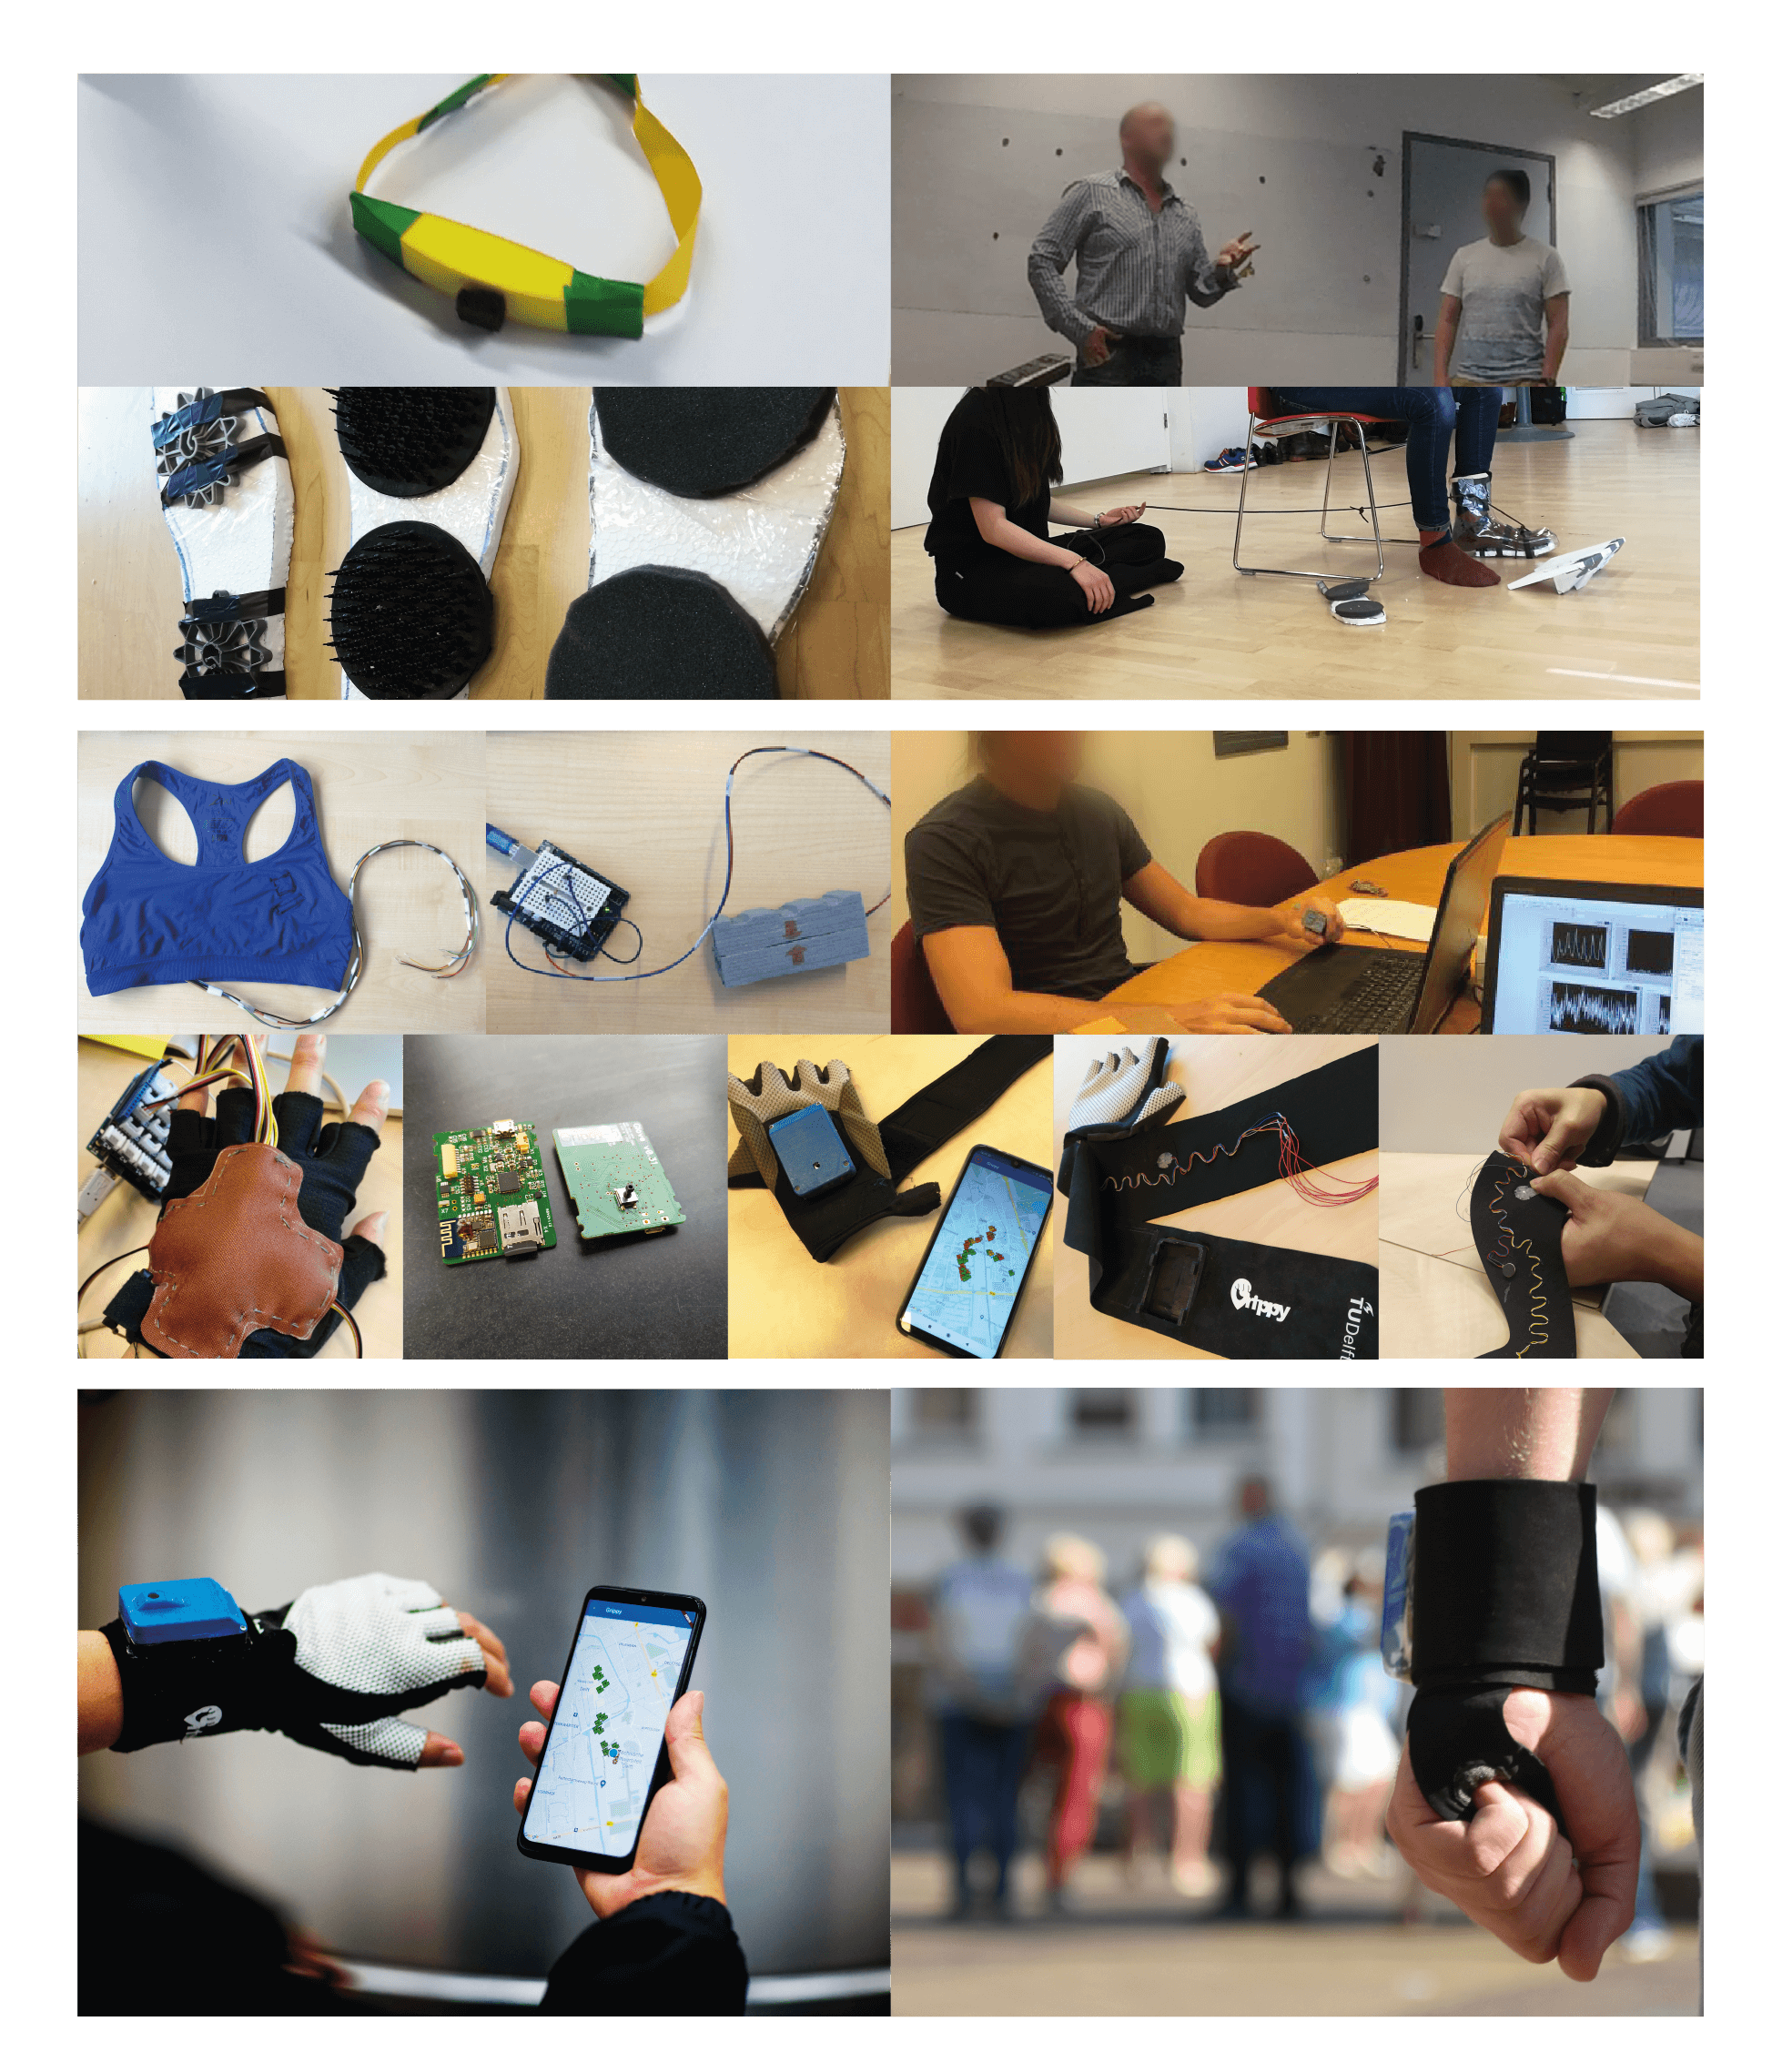 Impression of the glove in action during research experiments in the lab, with test subjects.